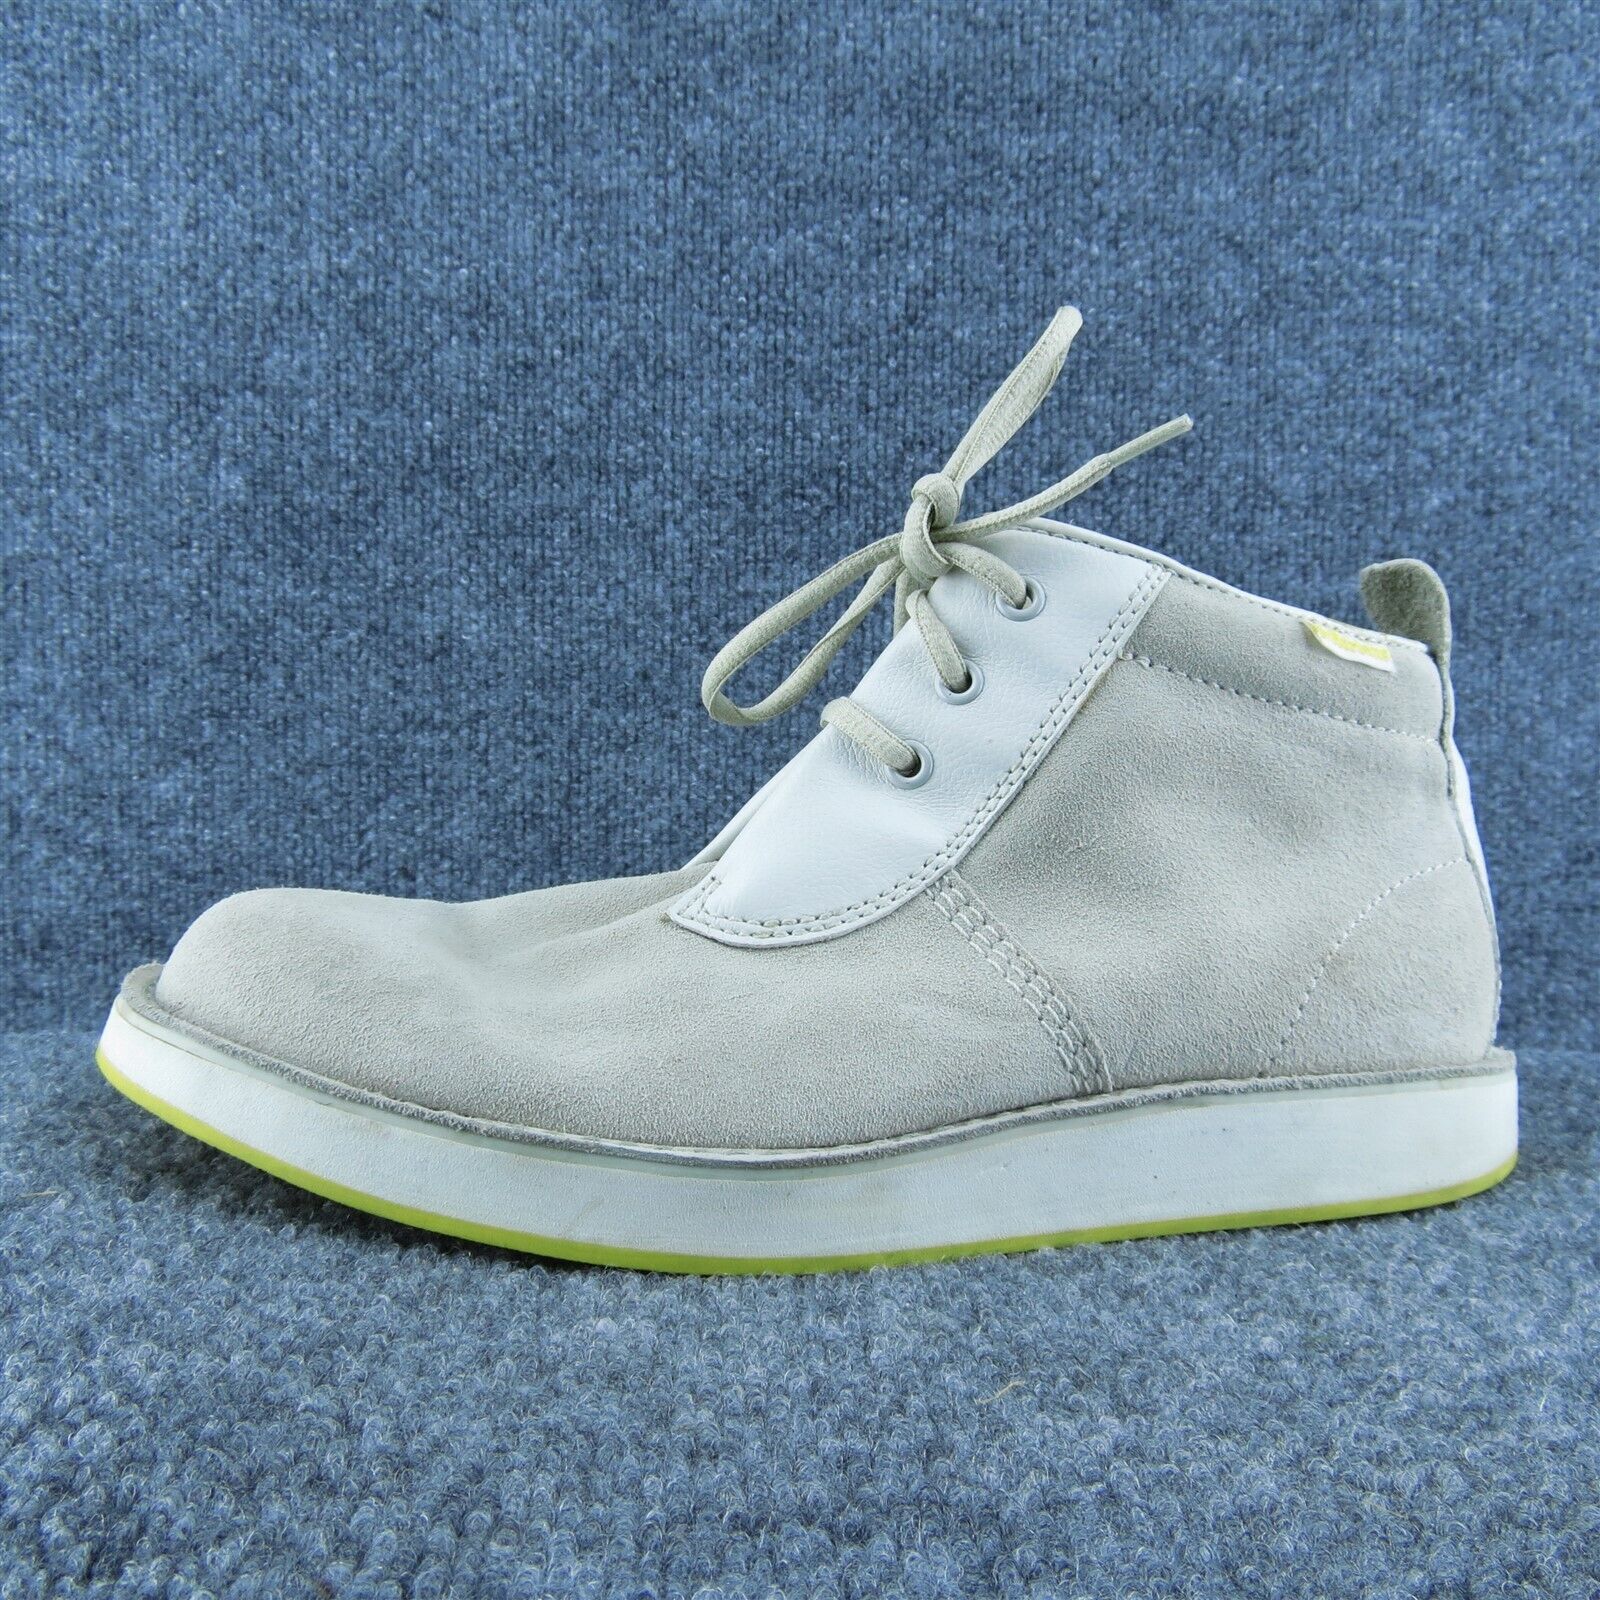 Primary image for Dr. Martens Harris Men Chukka Boots Gray Suede Lace Up Size 10 Medium